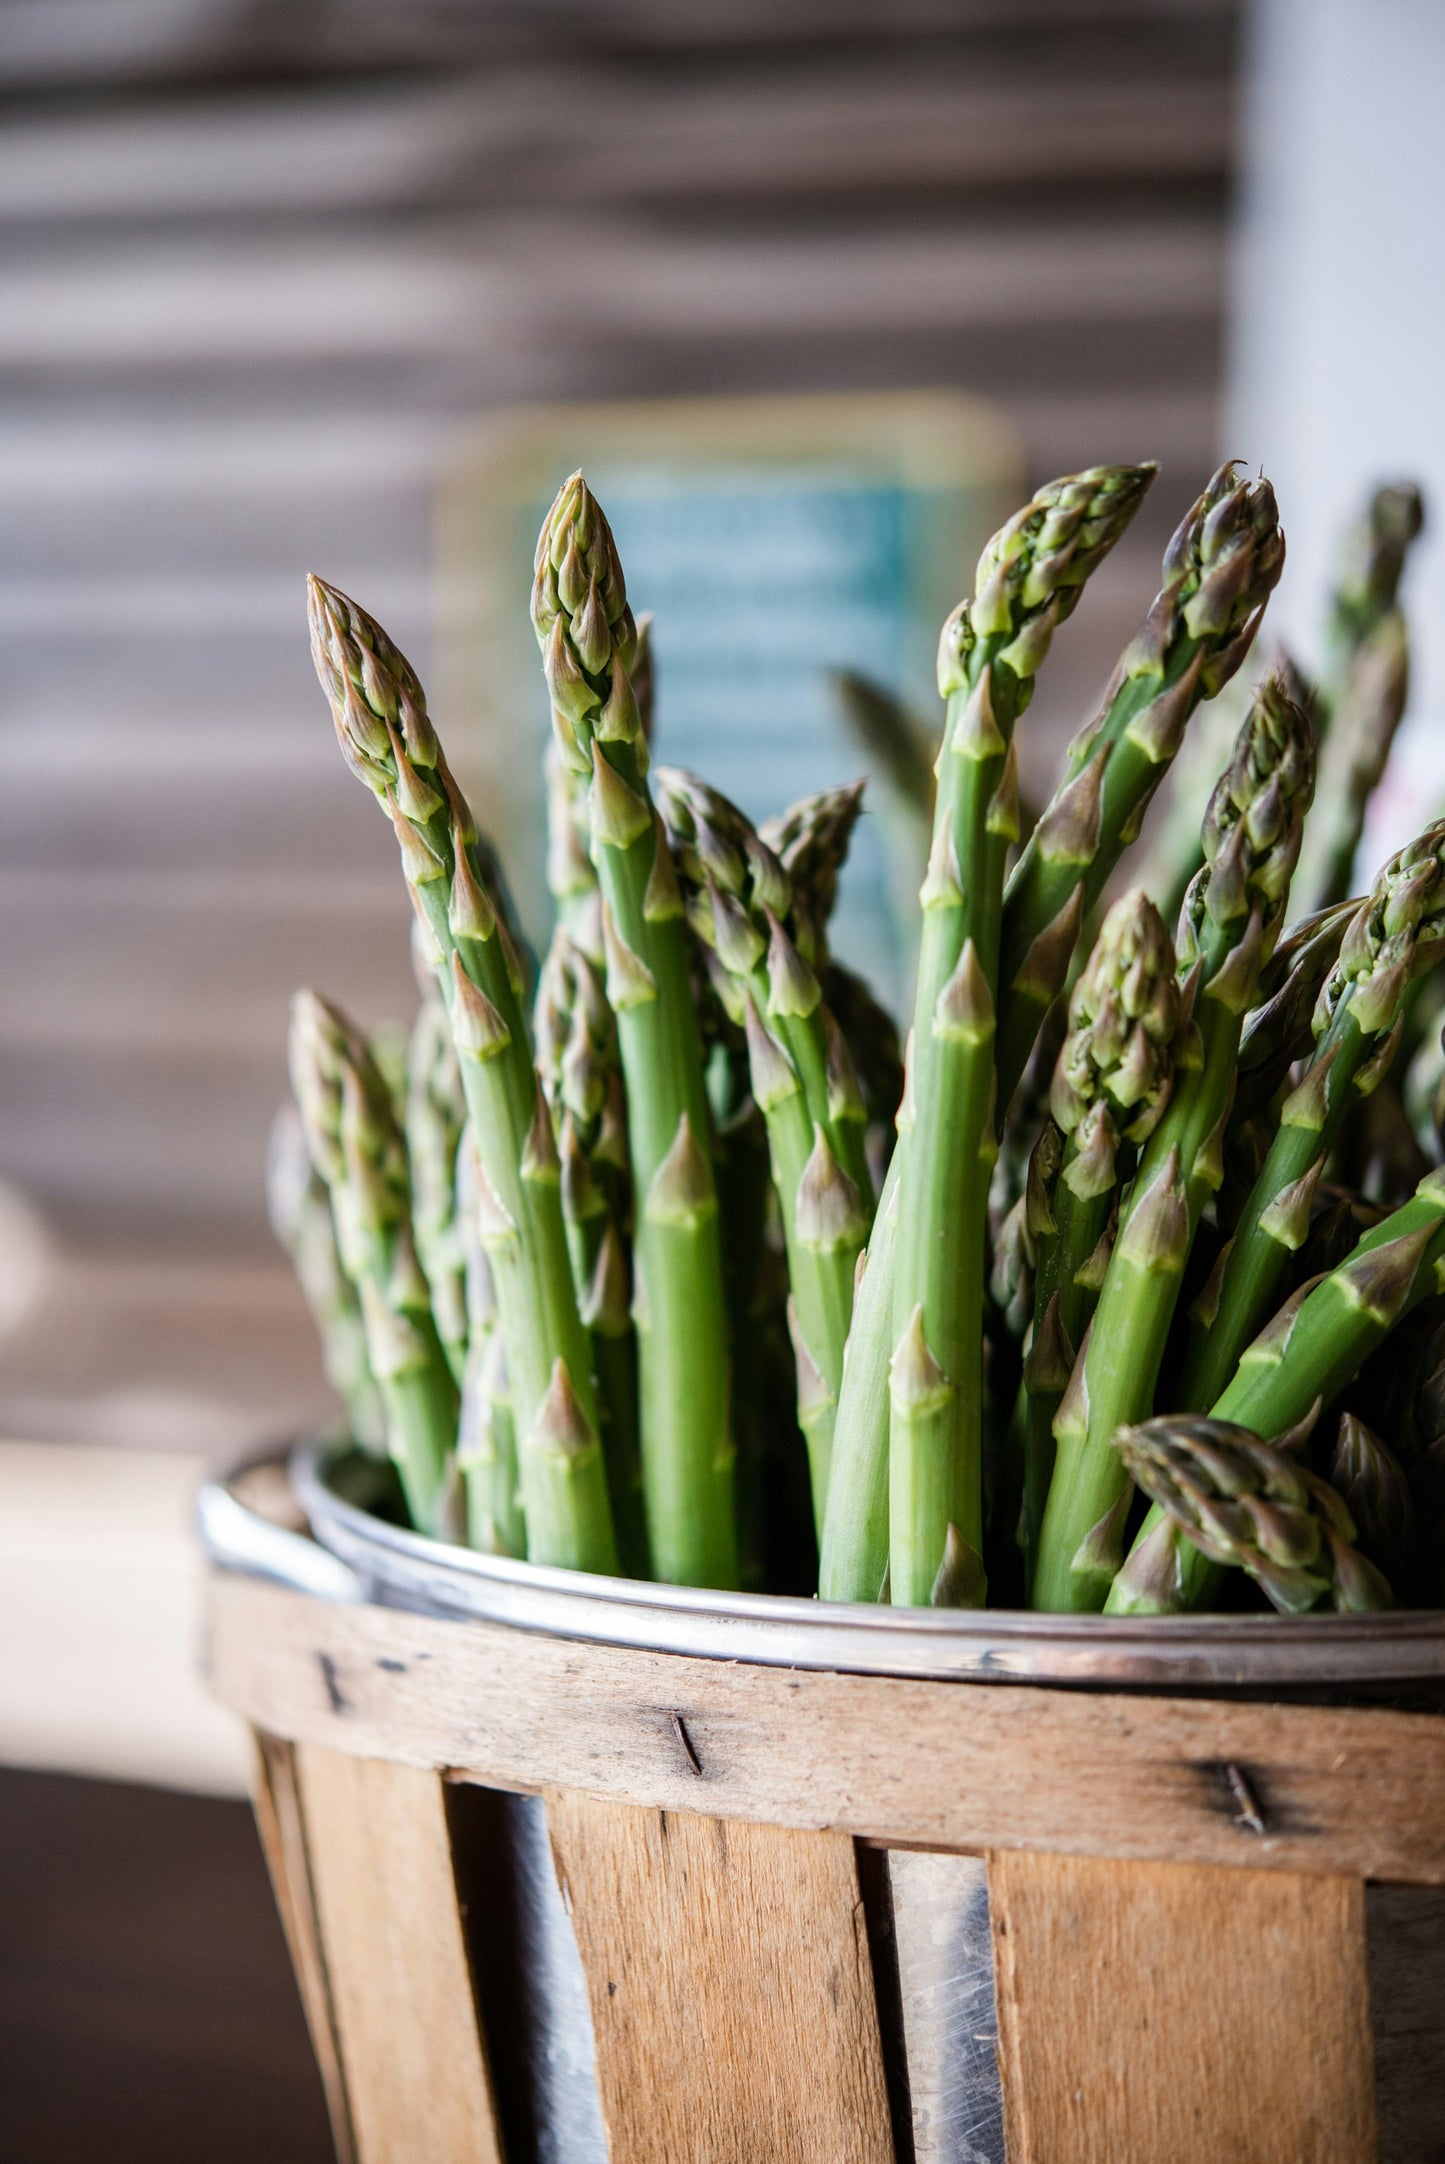 Asparagus, of the variety called, "Mary Washington," previously harvested. The many individual asparagus spears are standing upright within a metal pail, which is within a wooden crate.